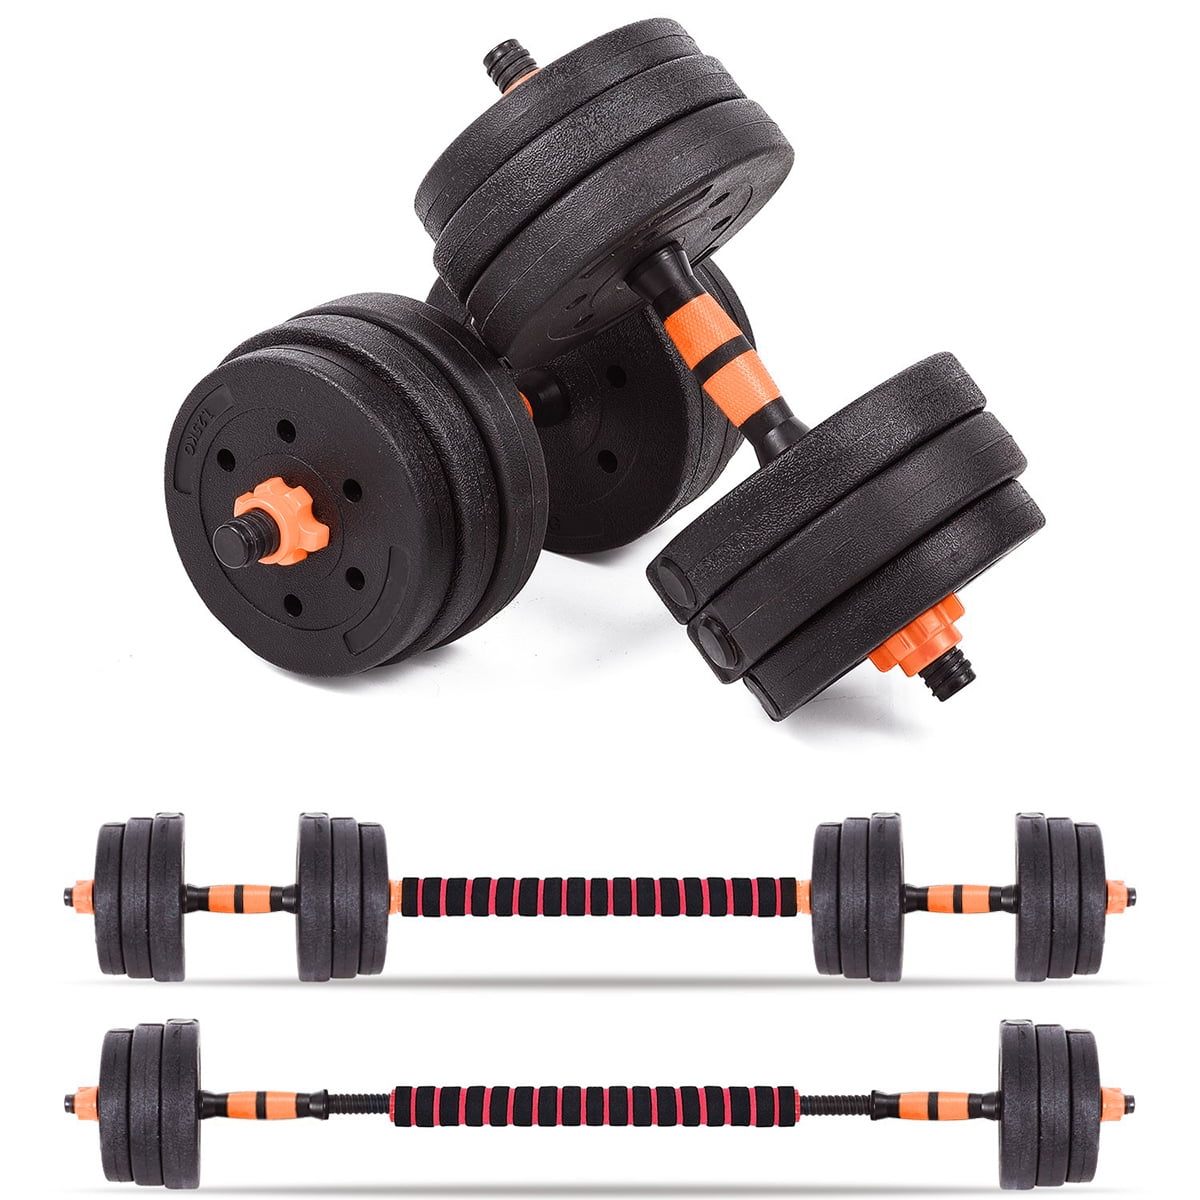 Totall 88 LB Weight Dumbbell Set Adjustable Cap Gym Barbell Plate Body Workout U 